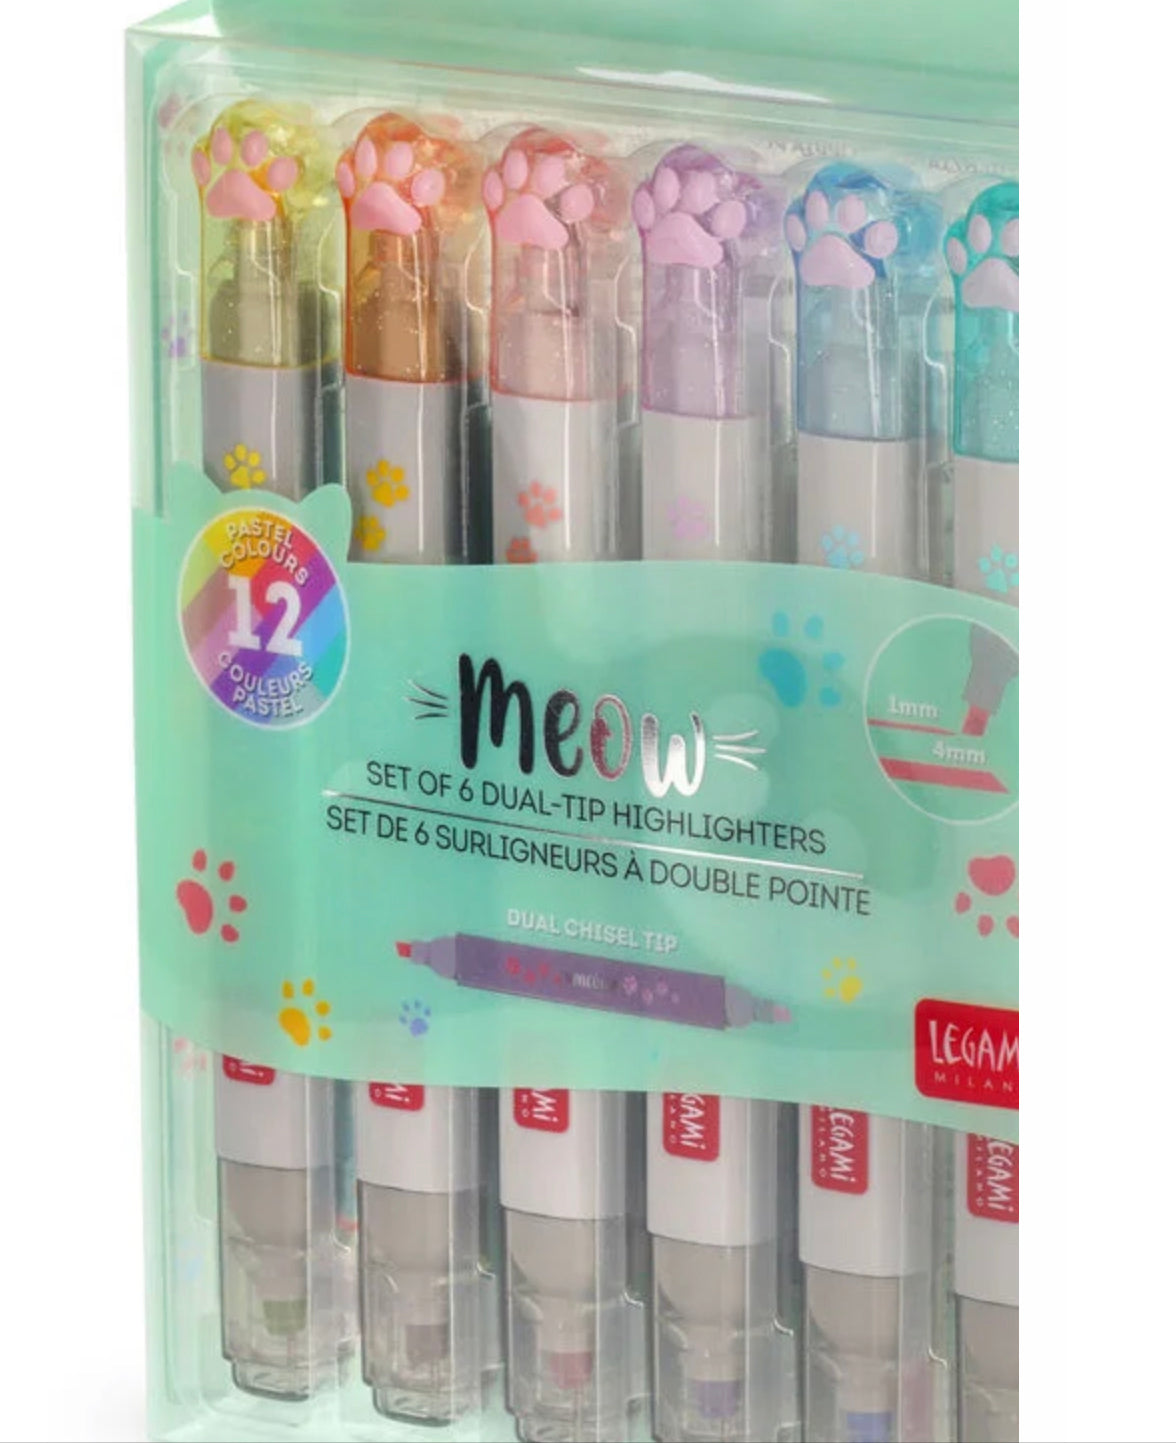 Meow cat paw pastel highlighter set by Legami